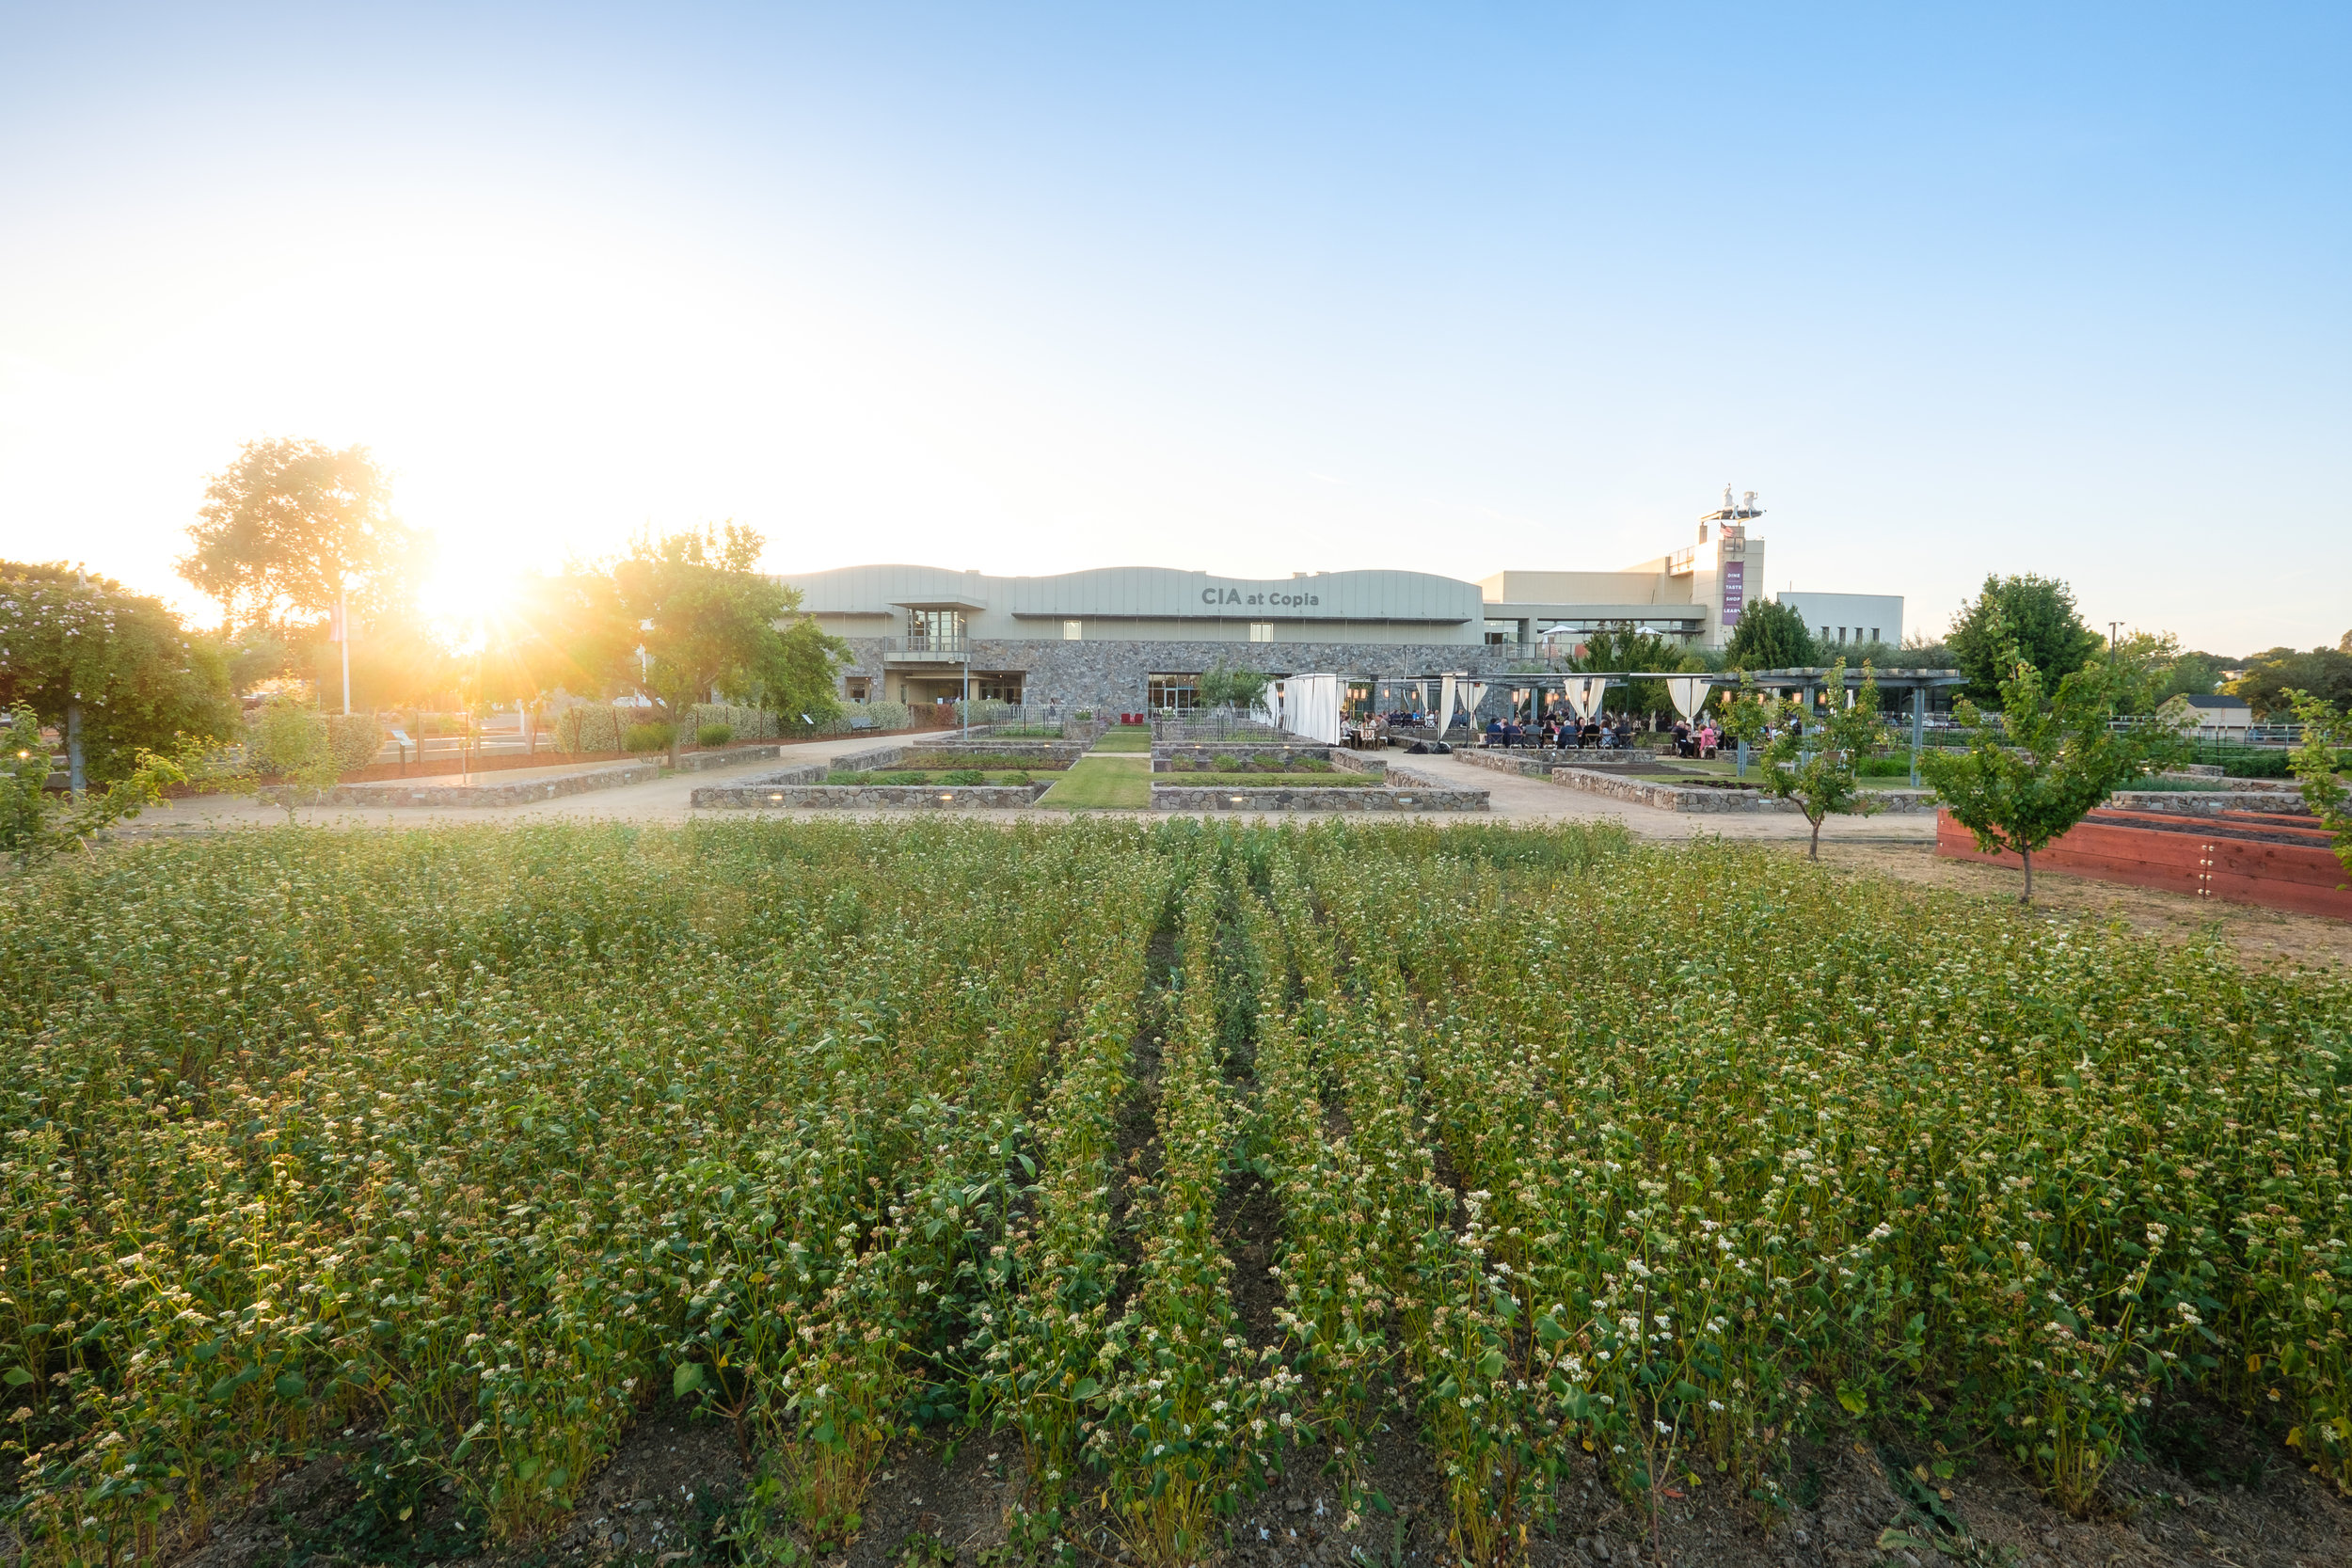 The edible gardens at The Culinary Institute of America at Copia